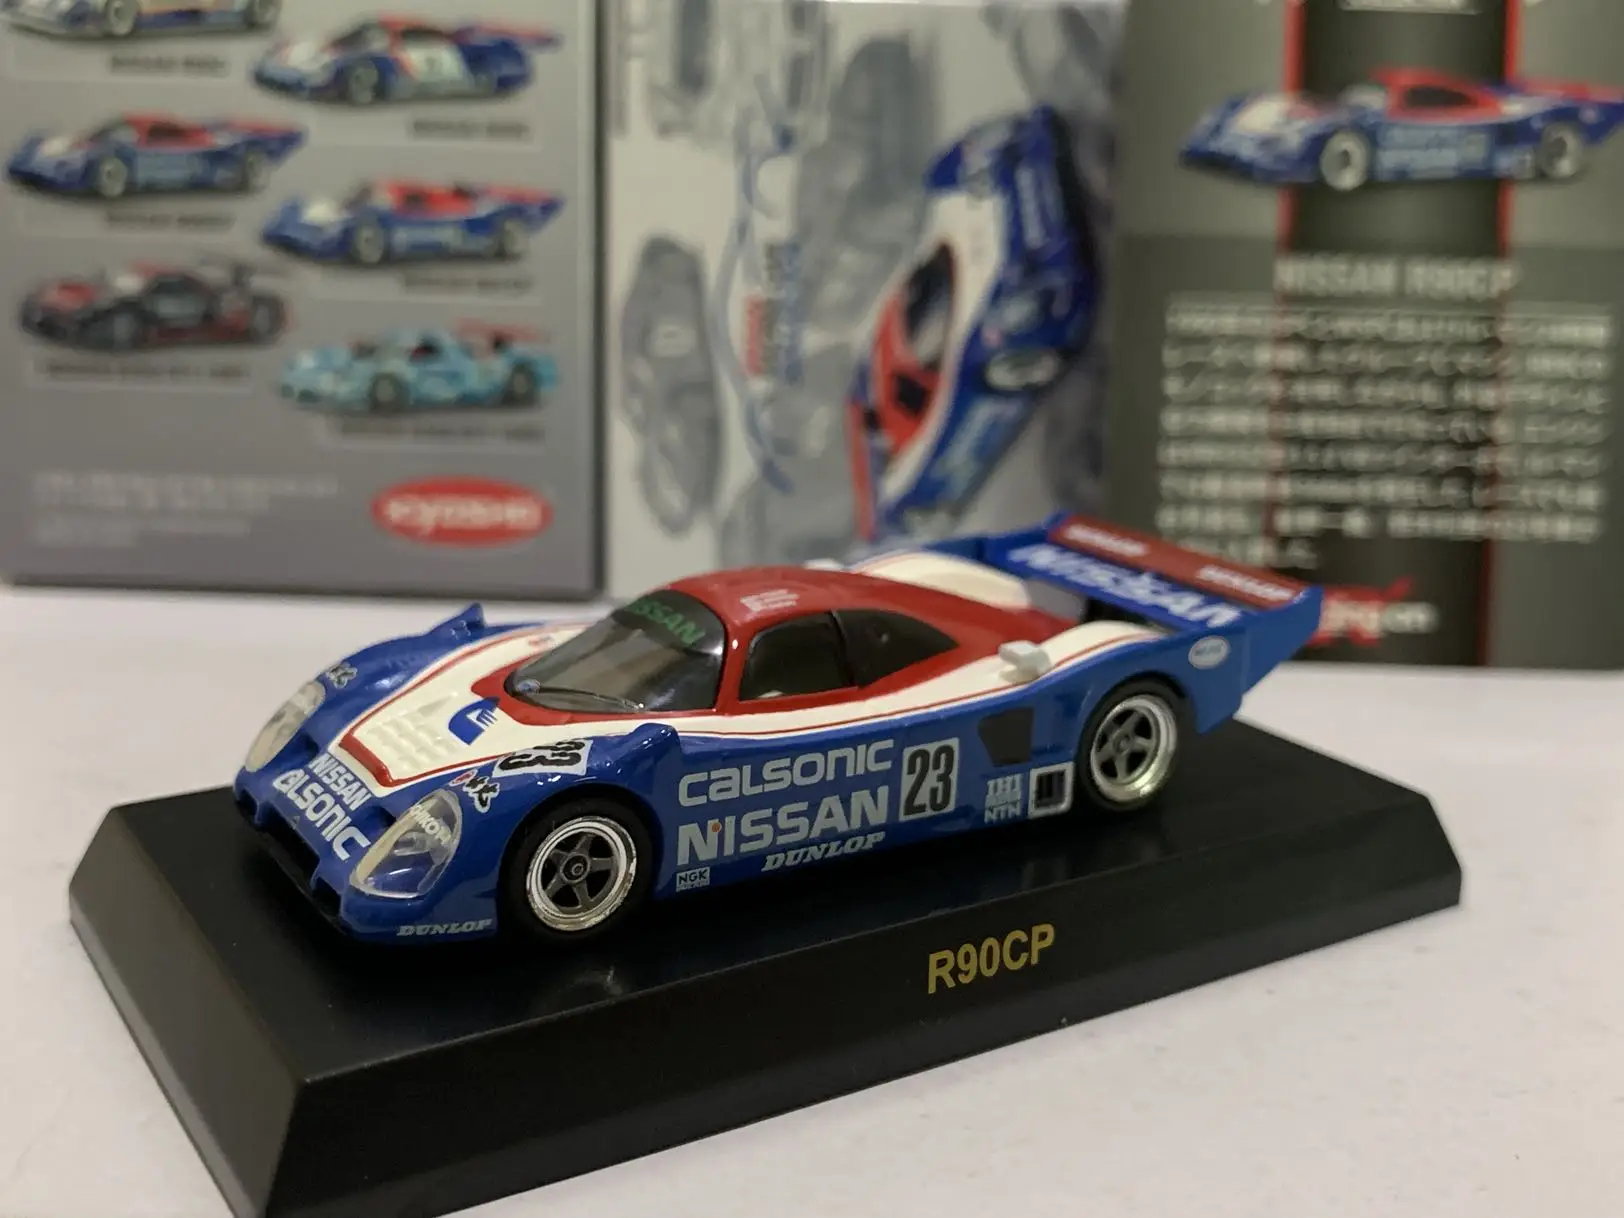 

1/64 KYOSHO Nissan R90CP Le Mans Racing No. 23 Calsonic Collect die casting alloy assembled trolley model